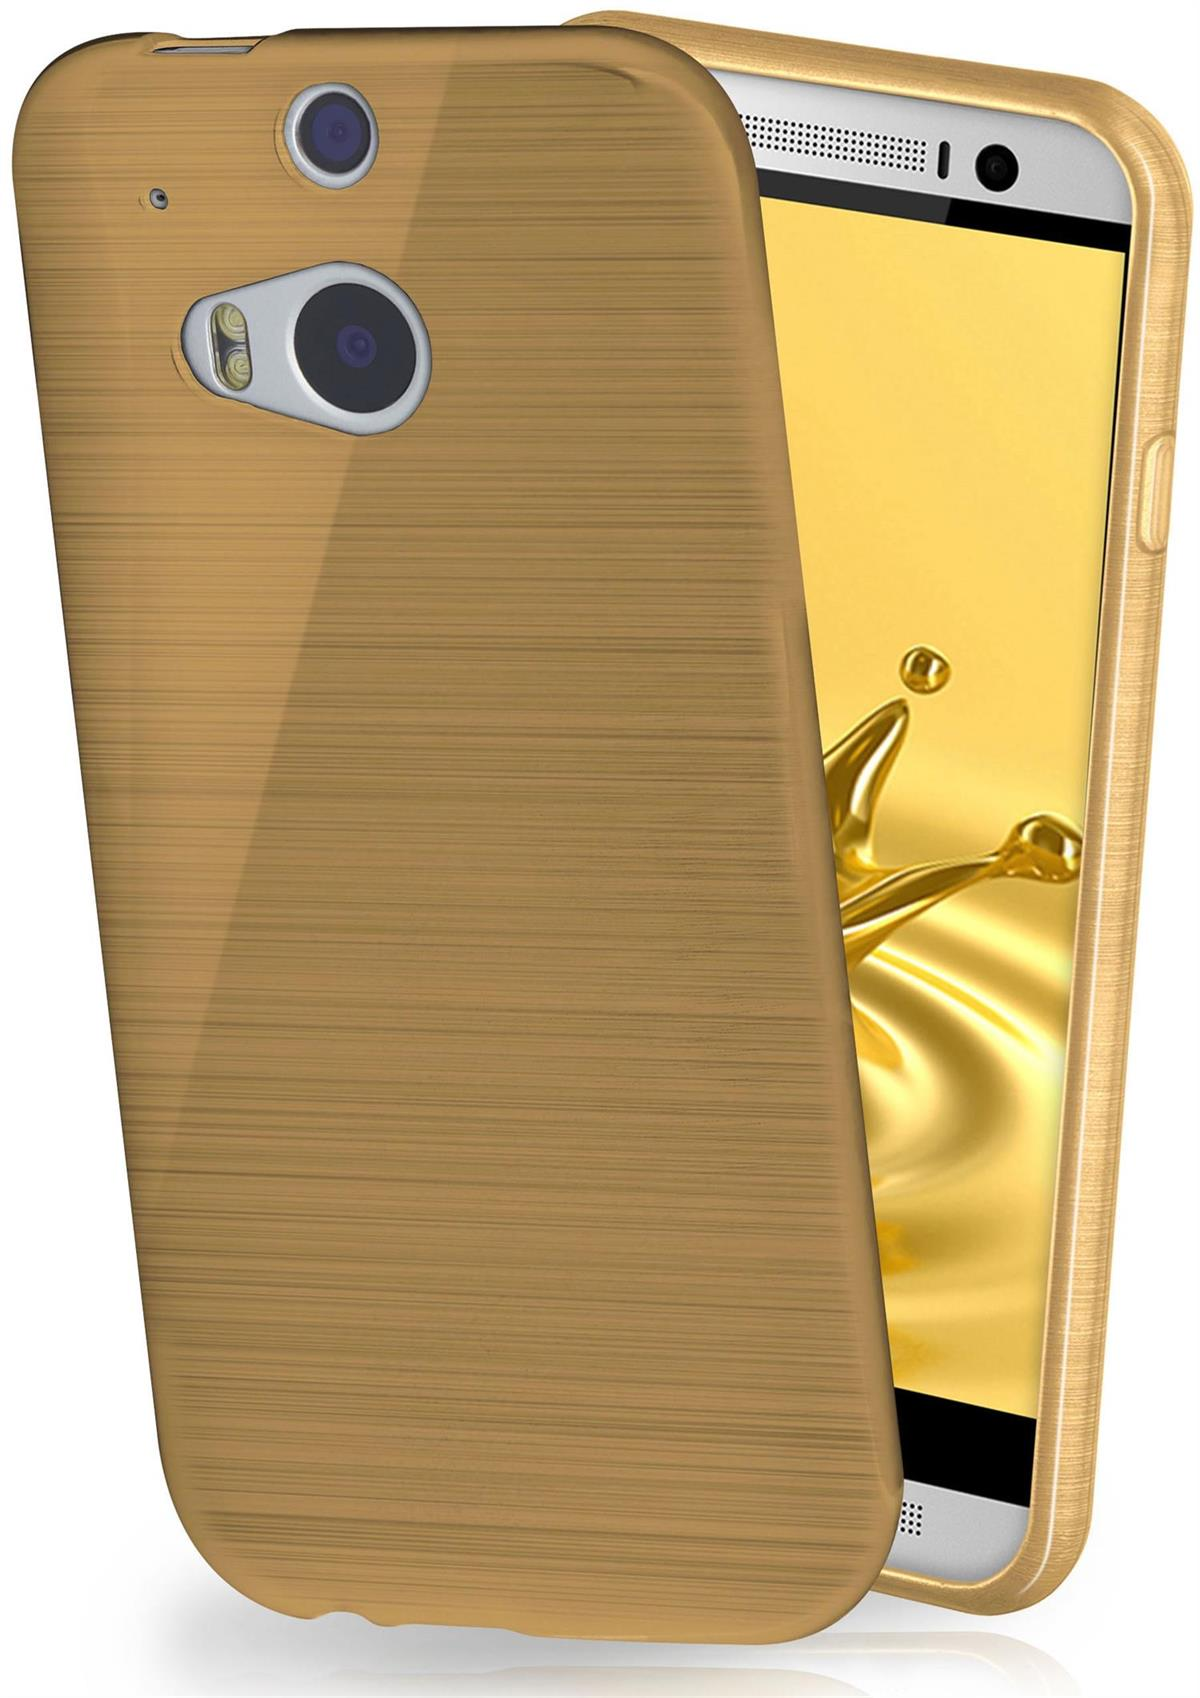 MOEX Brushed Case, One M8s, Ivory-Gold Backcover, HTC